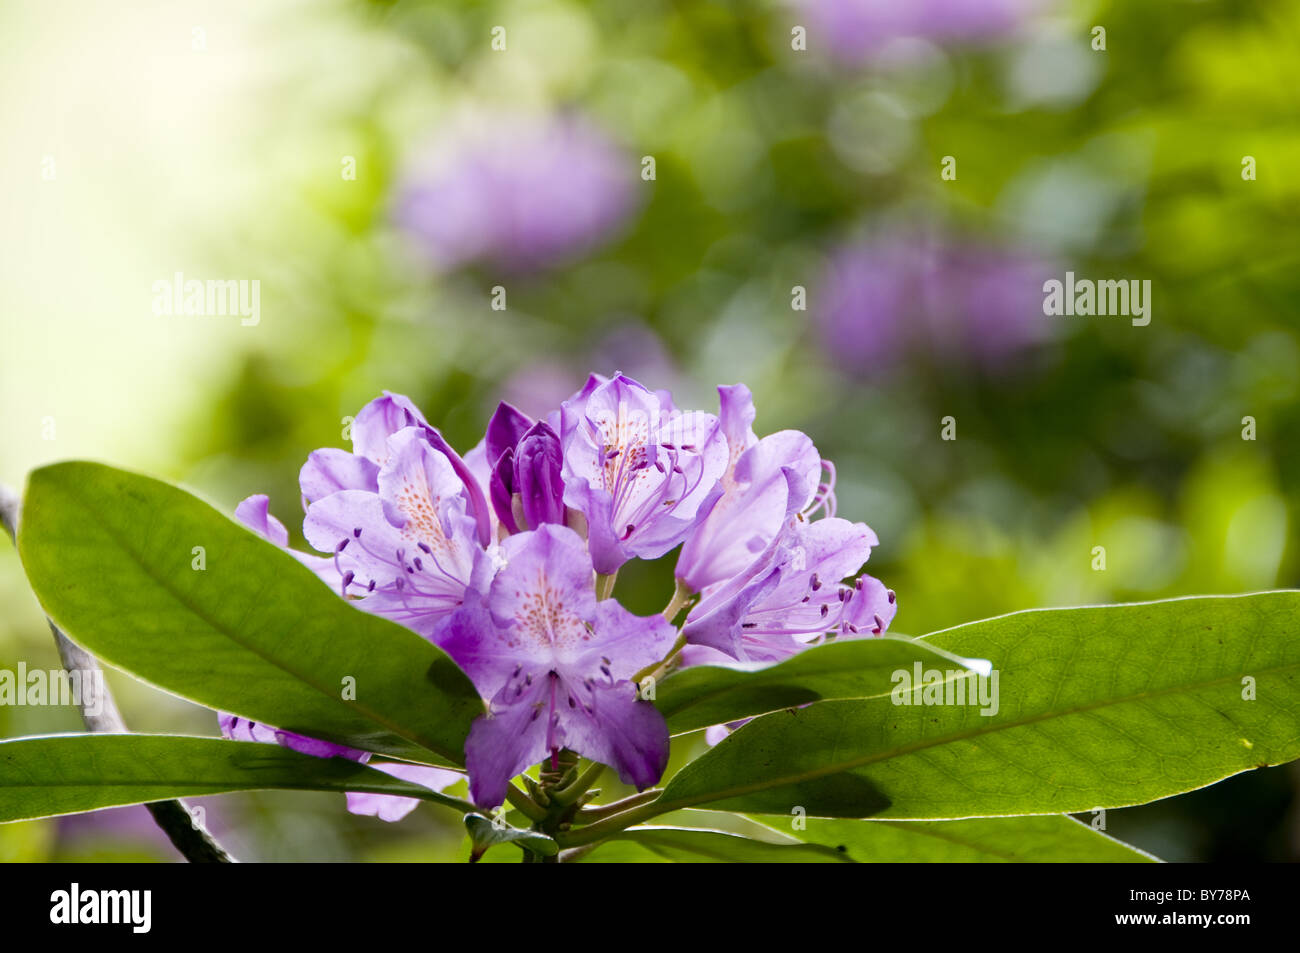 rhododendron captured from a low angle showing flowers and foliage. Stock Photo